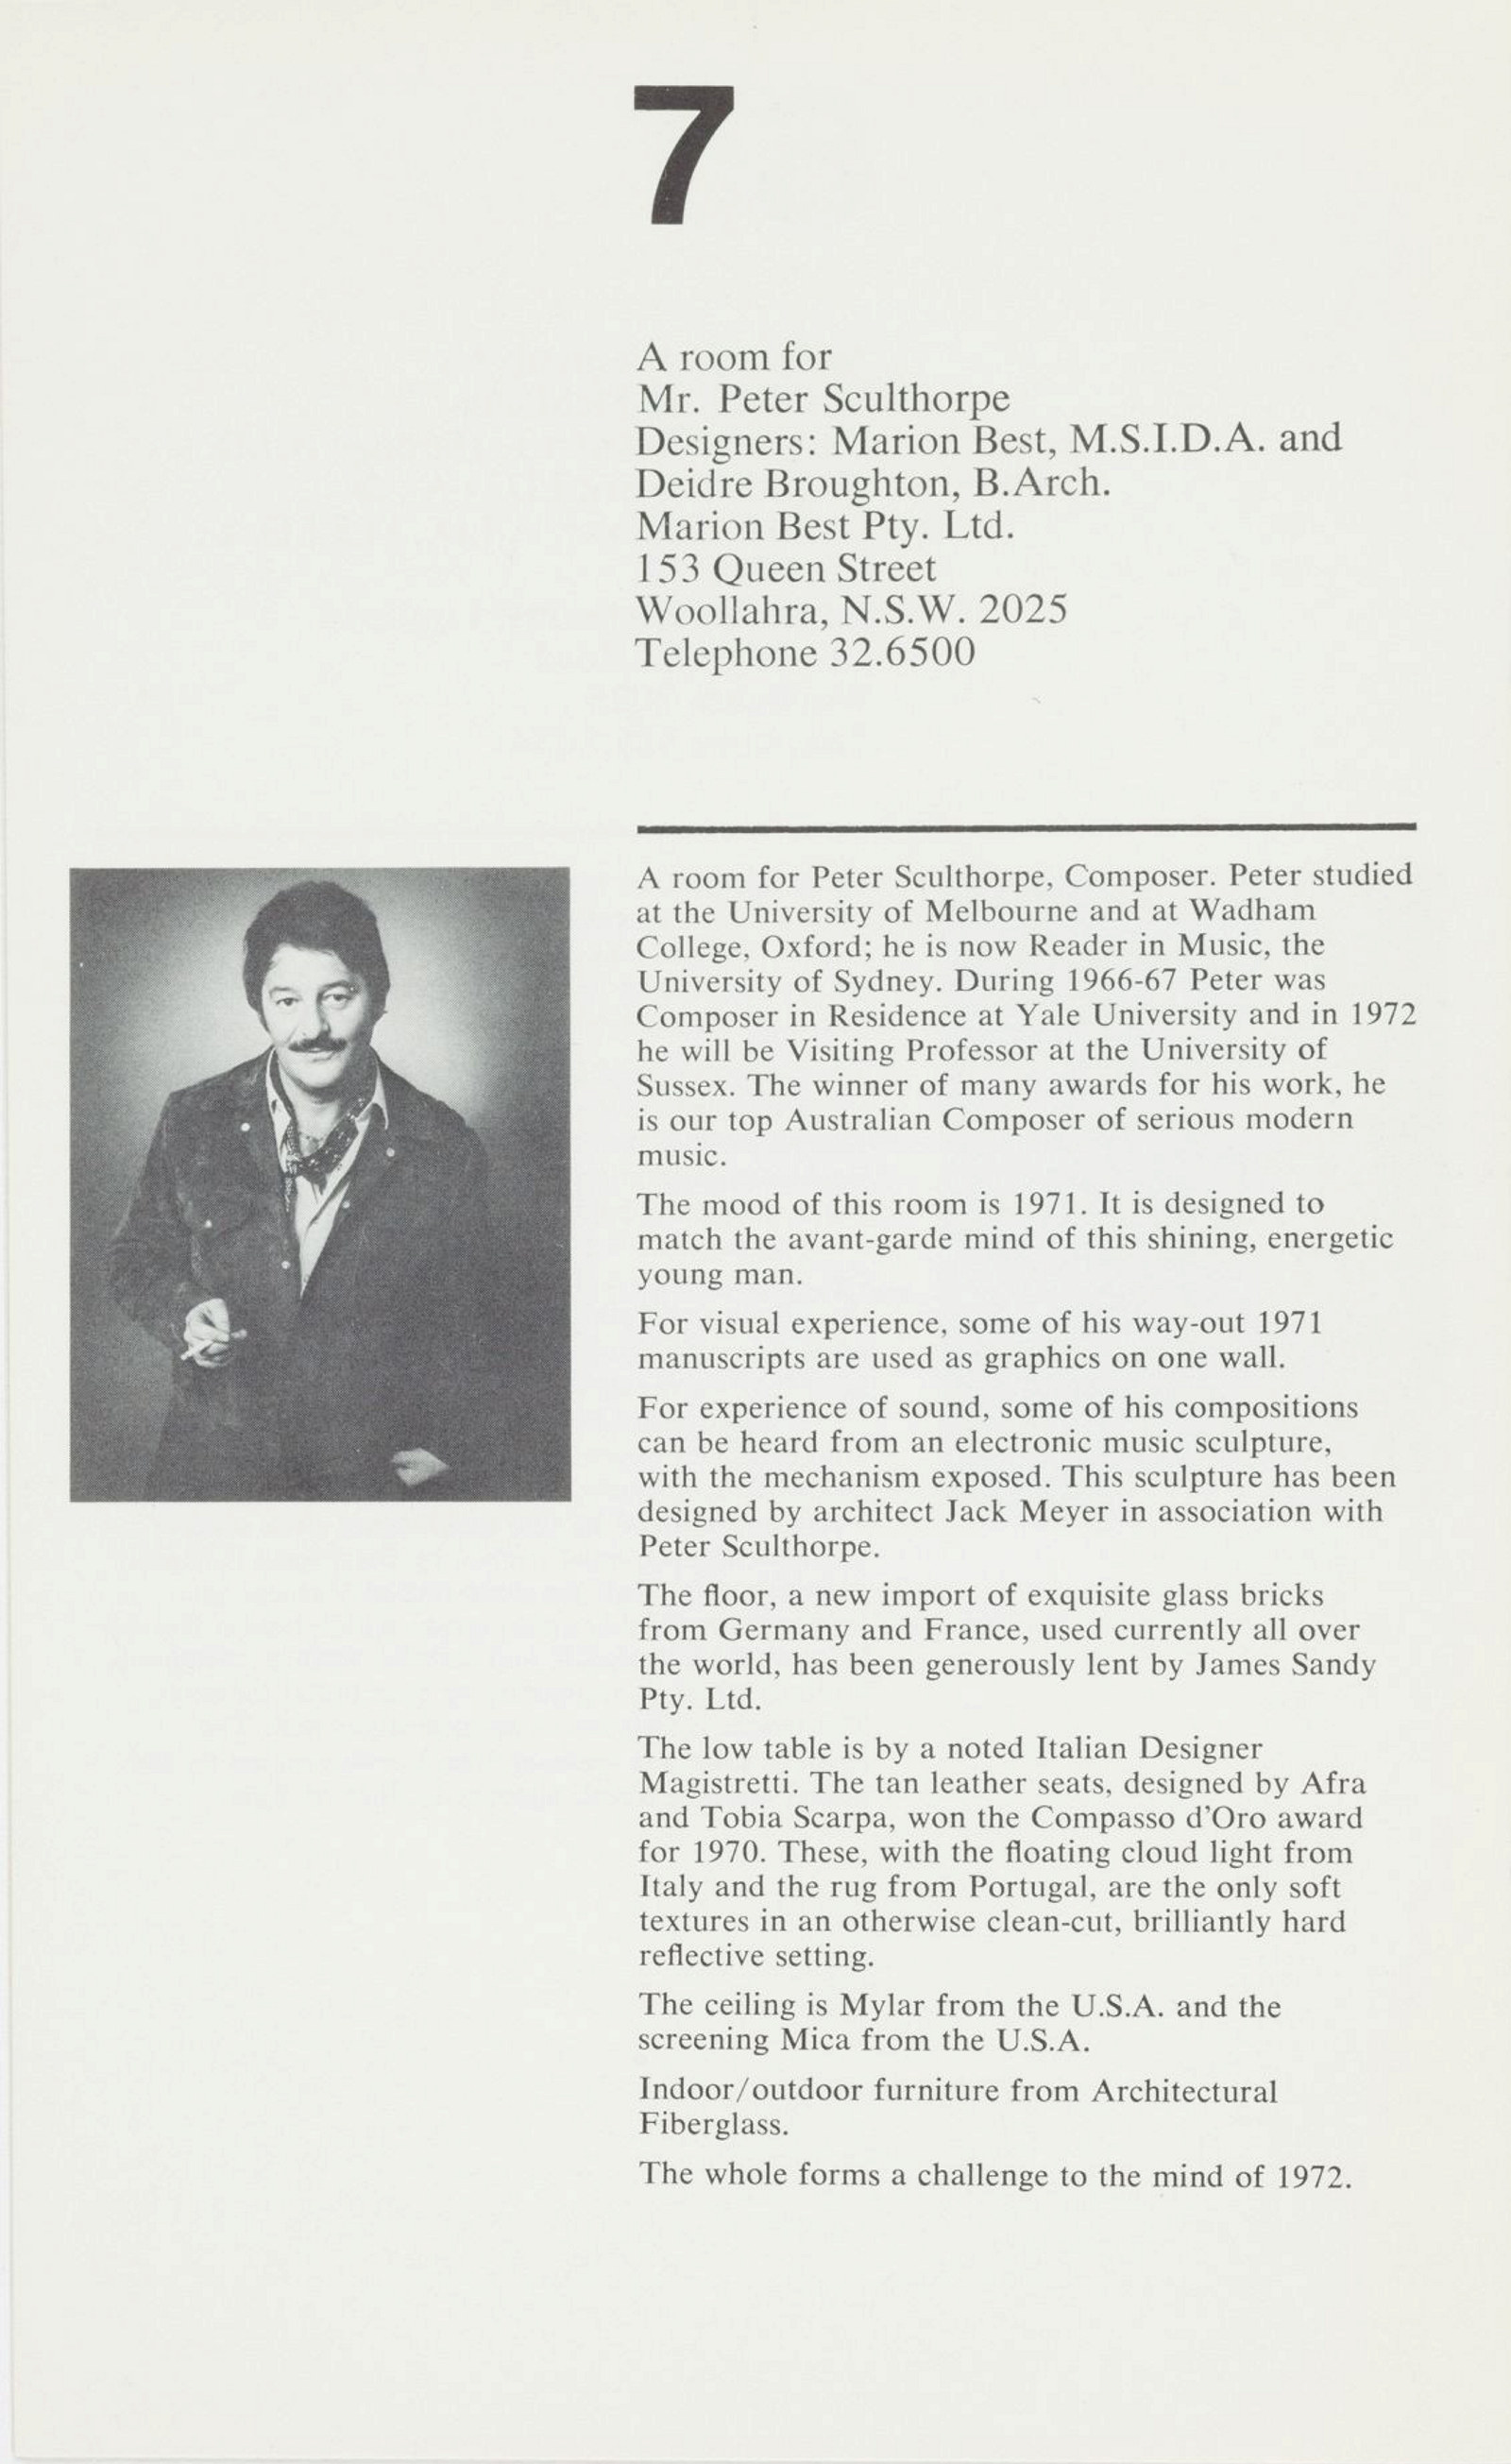 'A room  for Mr Peter Sculthorpe' from 'Rooms on view 1971', catalogue of an exhibition held to celebrate the Twentieth anniversary of the Society of Interior Designers of Australia